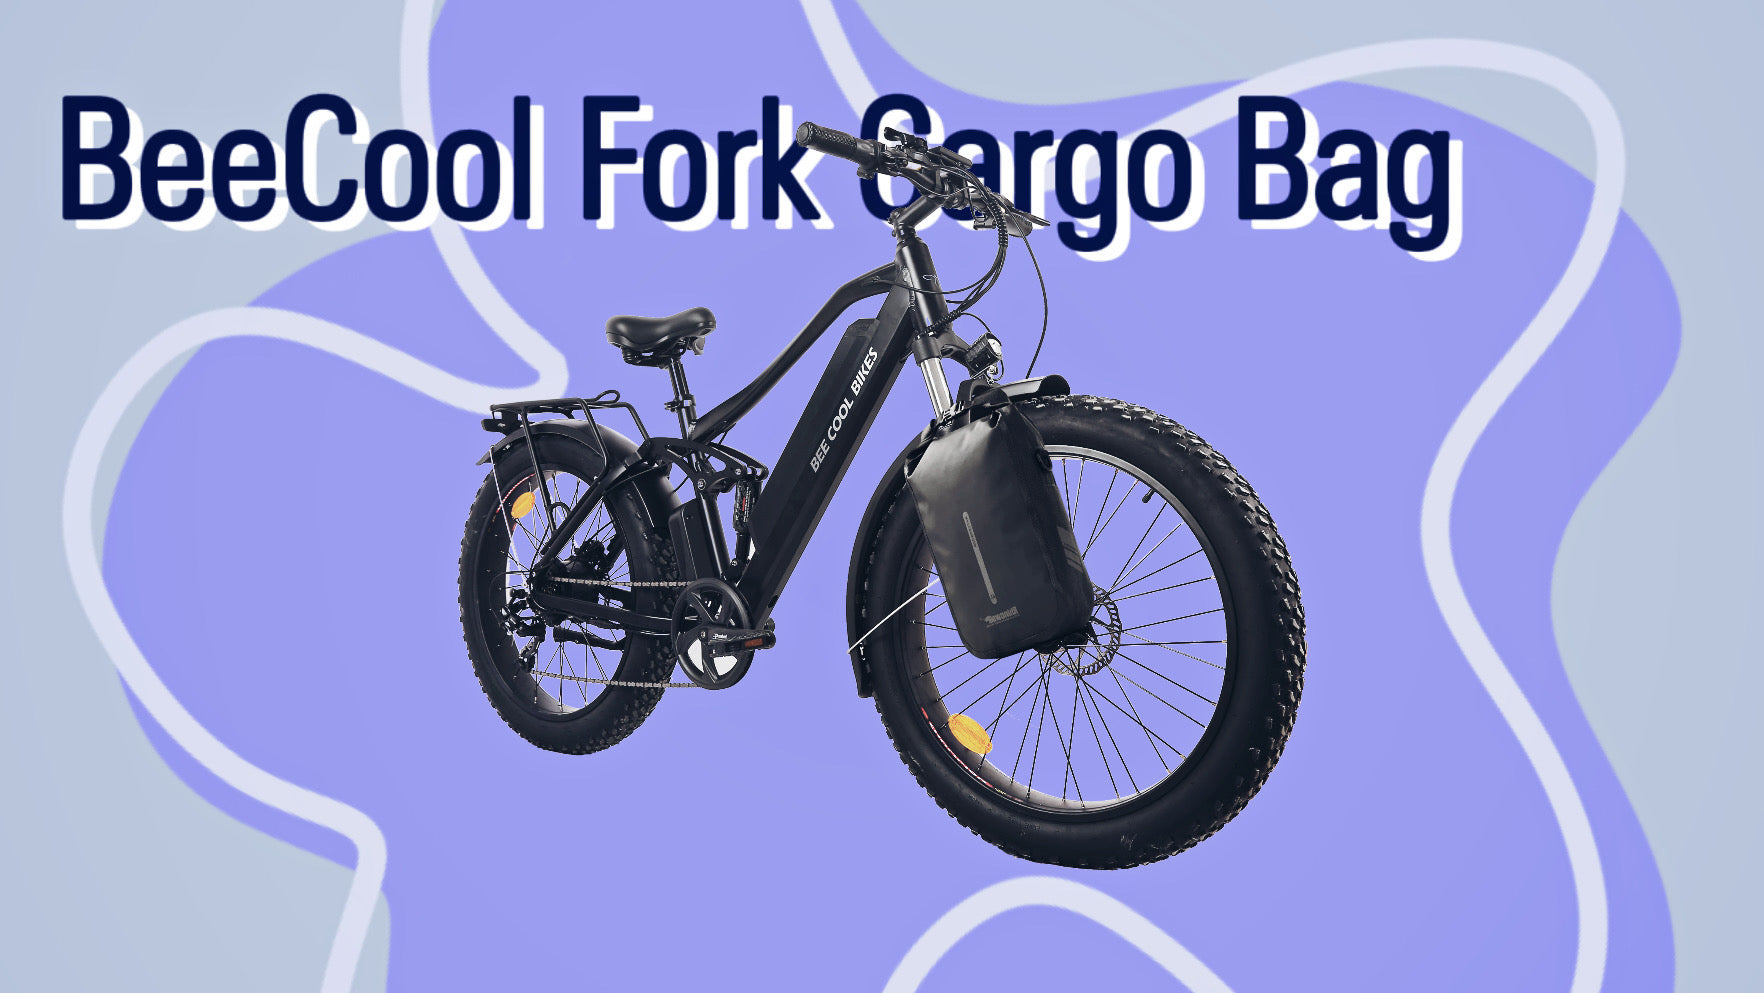 Introducing BeeCool Bikes' Affordable and Practical Front Fork Cargo Rack Bag